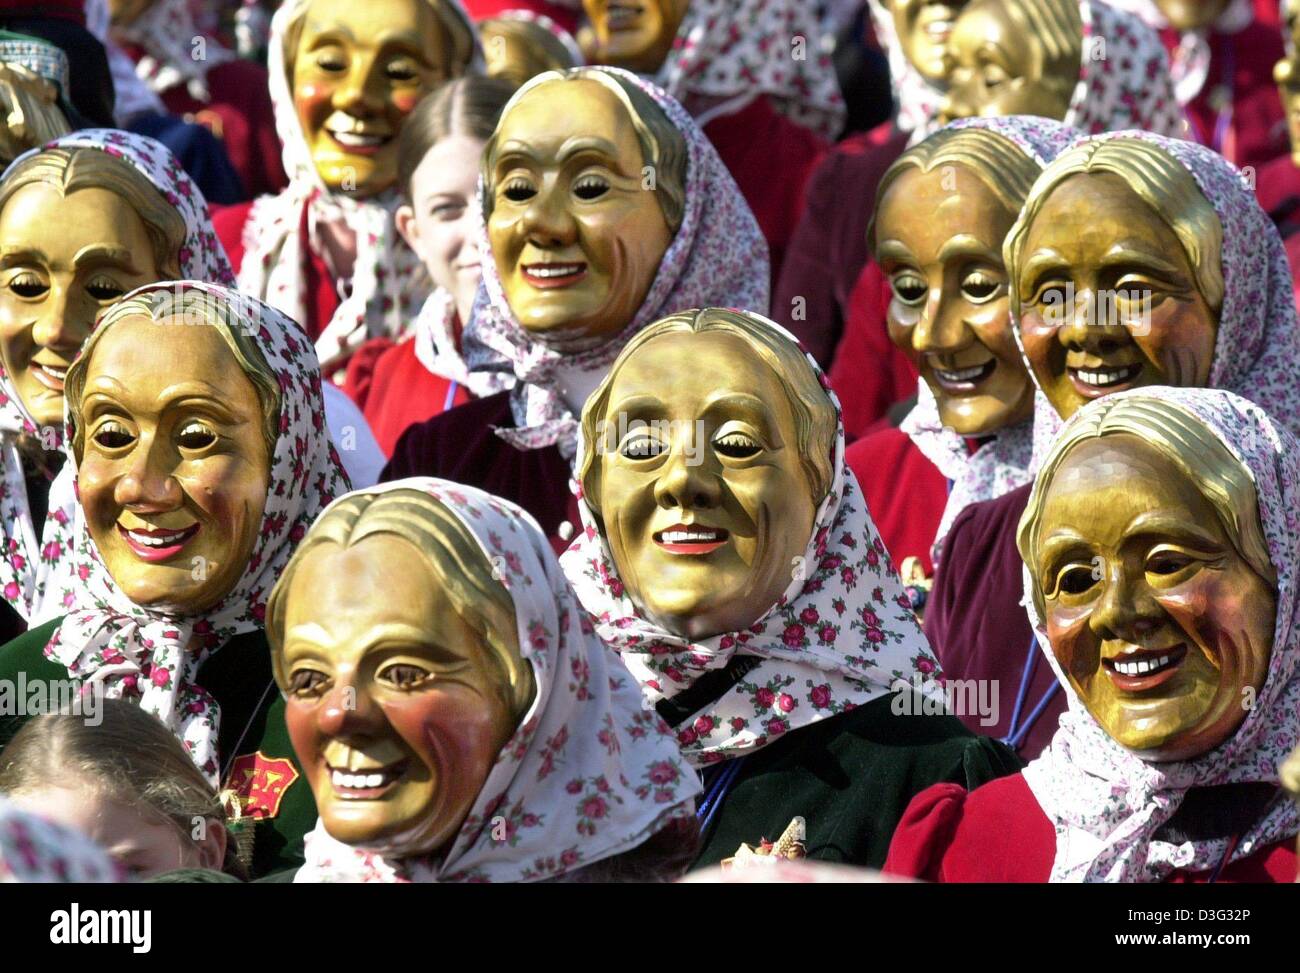 (dpa) - Identically clad women with masks, so-called 'Schnurrewiber', march through the streets to storm the town hall and to take over the power in Staufen, southern Germany, 27 February 2003. As a tradition, the carnival fools symbolically take over the power on the 'Schmotzige Dunschdig' (dirty thursday) to herald the climax of the carnival festivities of the Swabian-Alemannic c Stock Photo